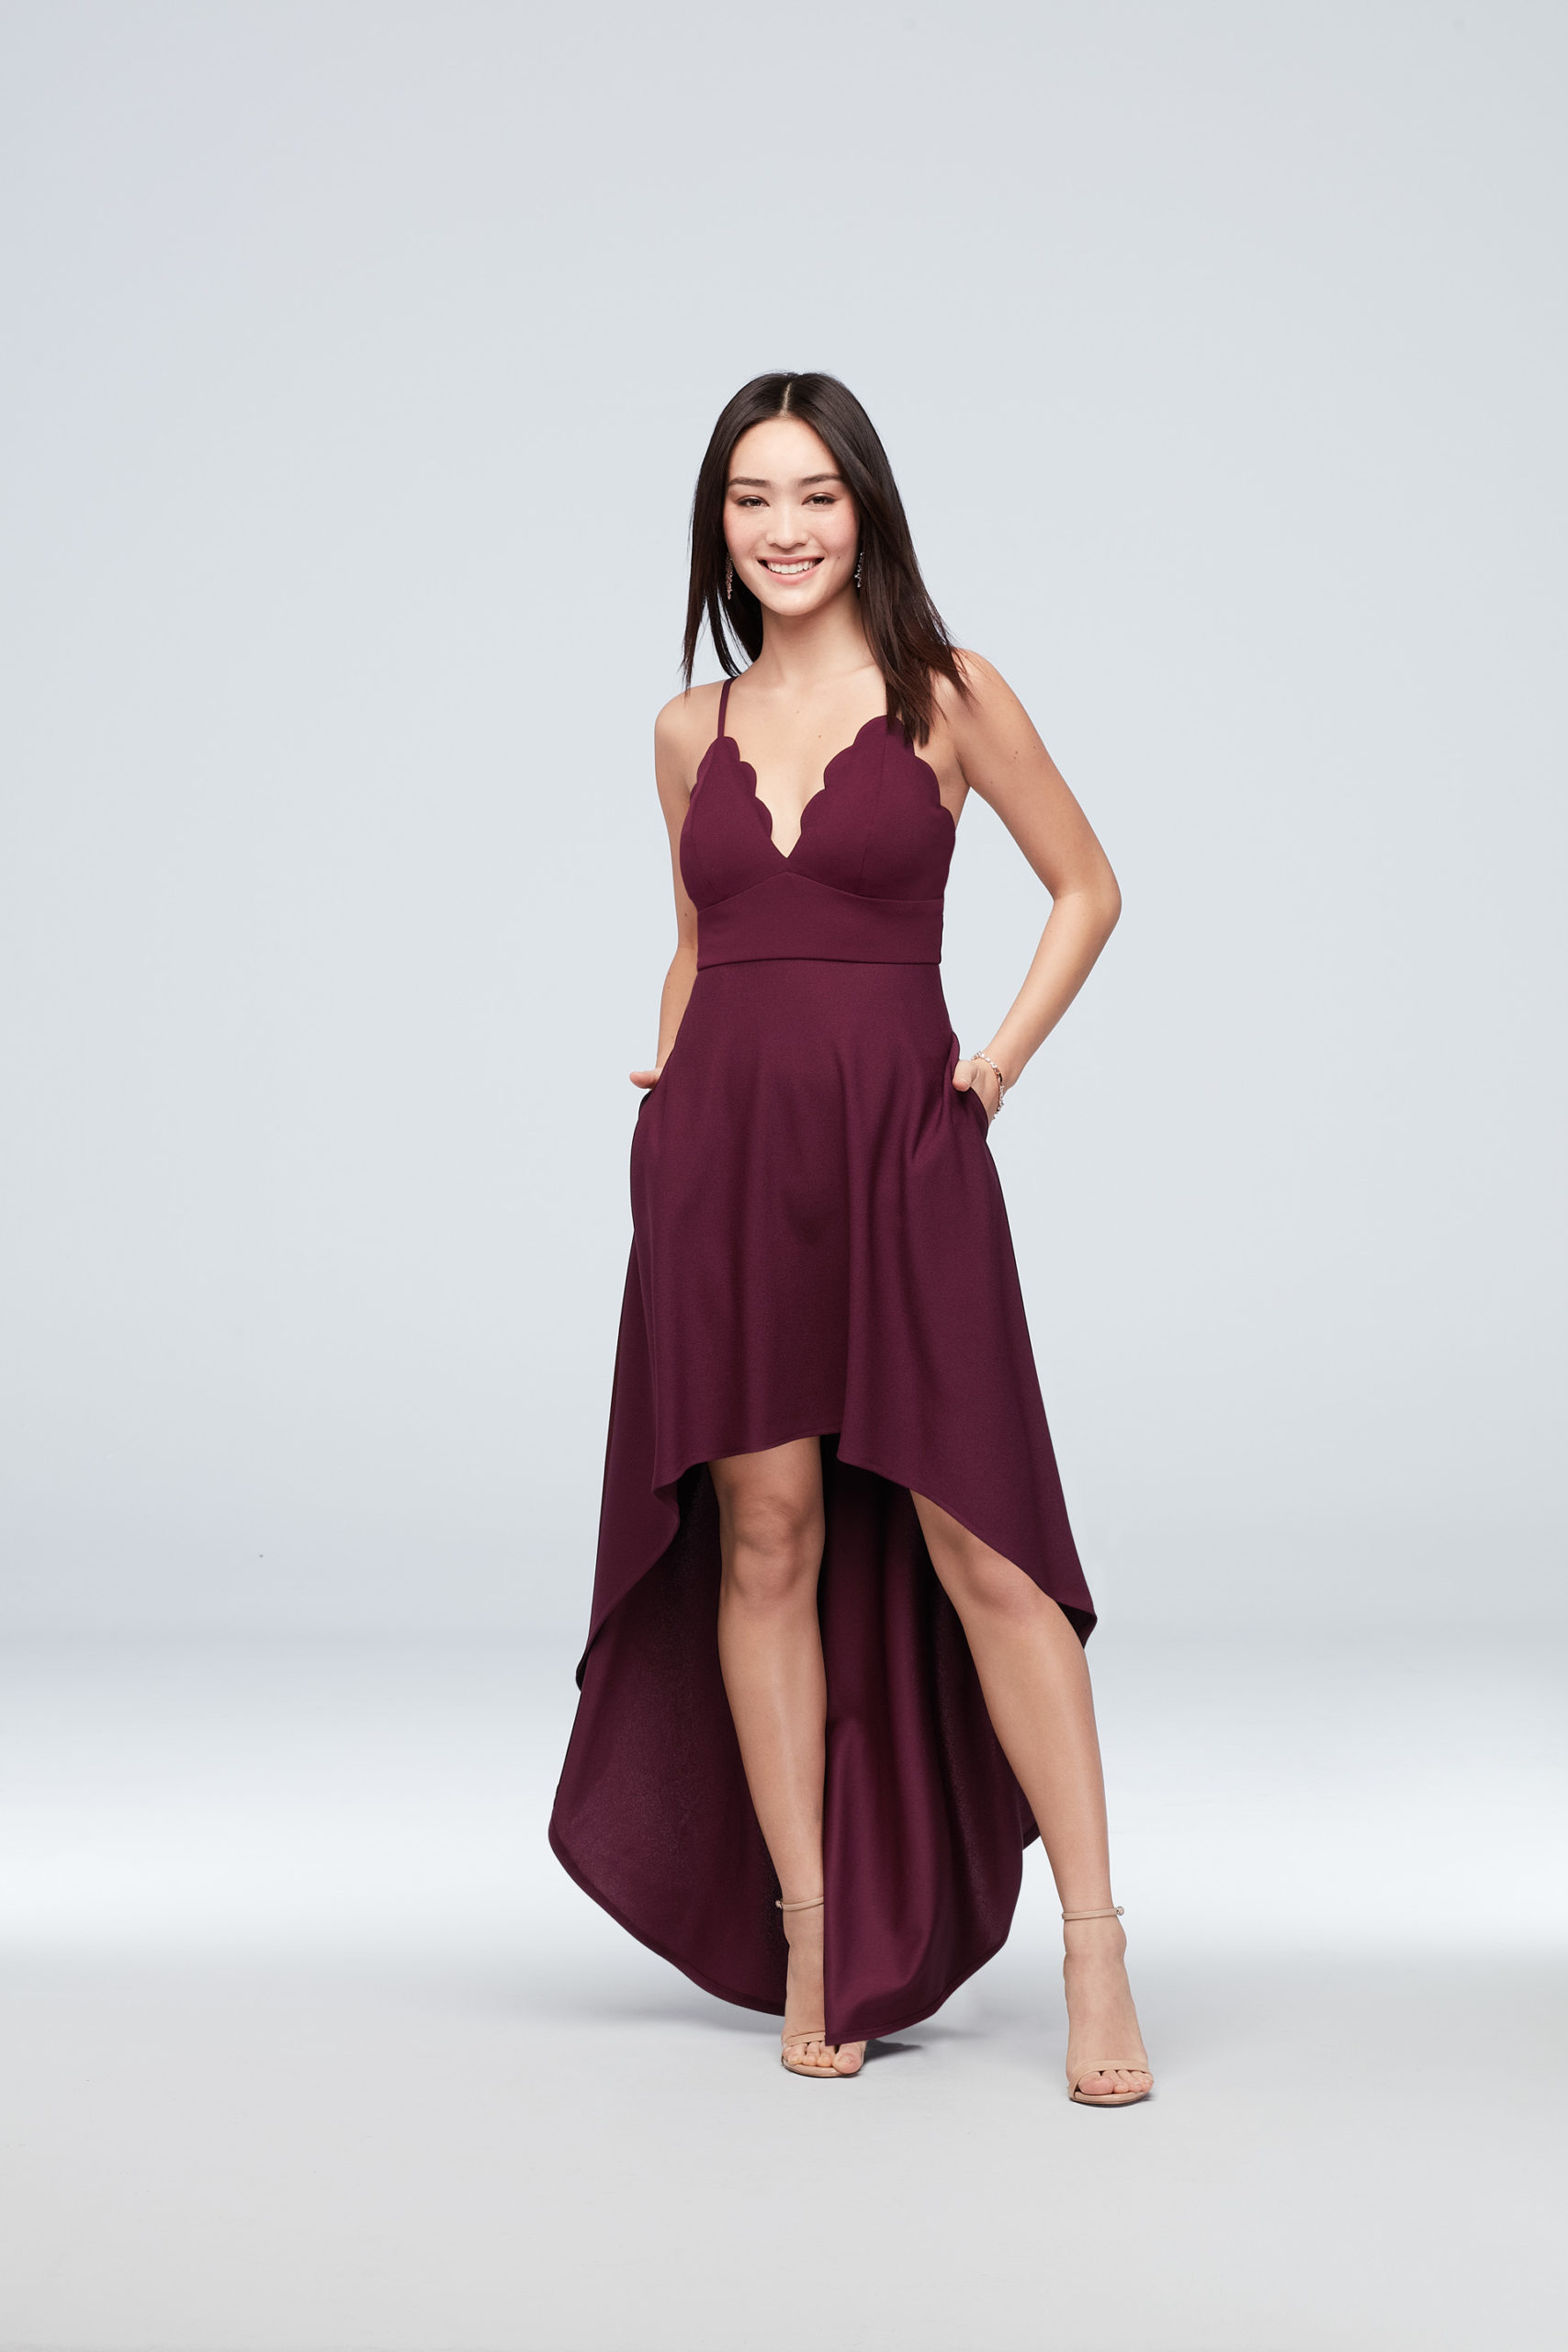 What to Wear Fall Wedding Guest Dresses David's Bridal Blog